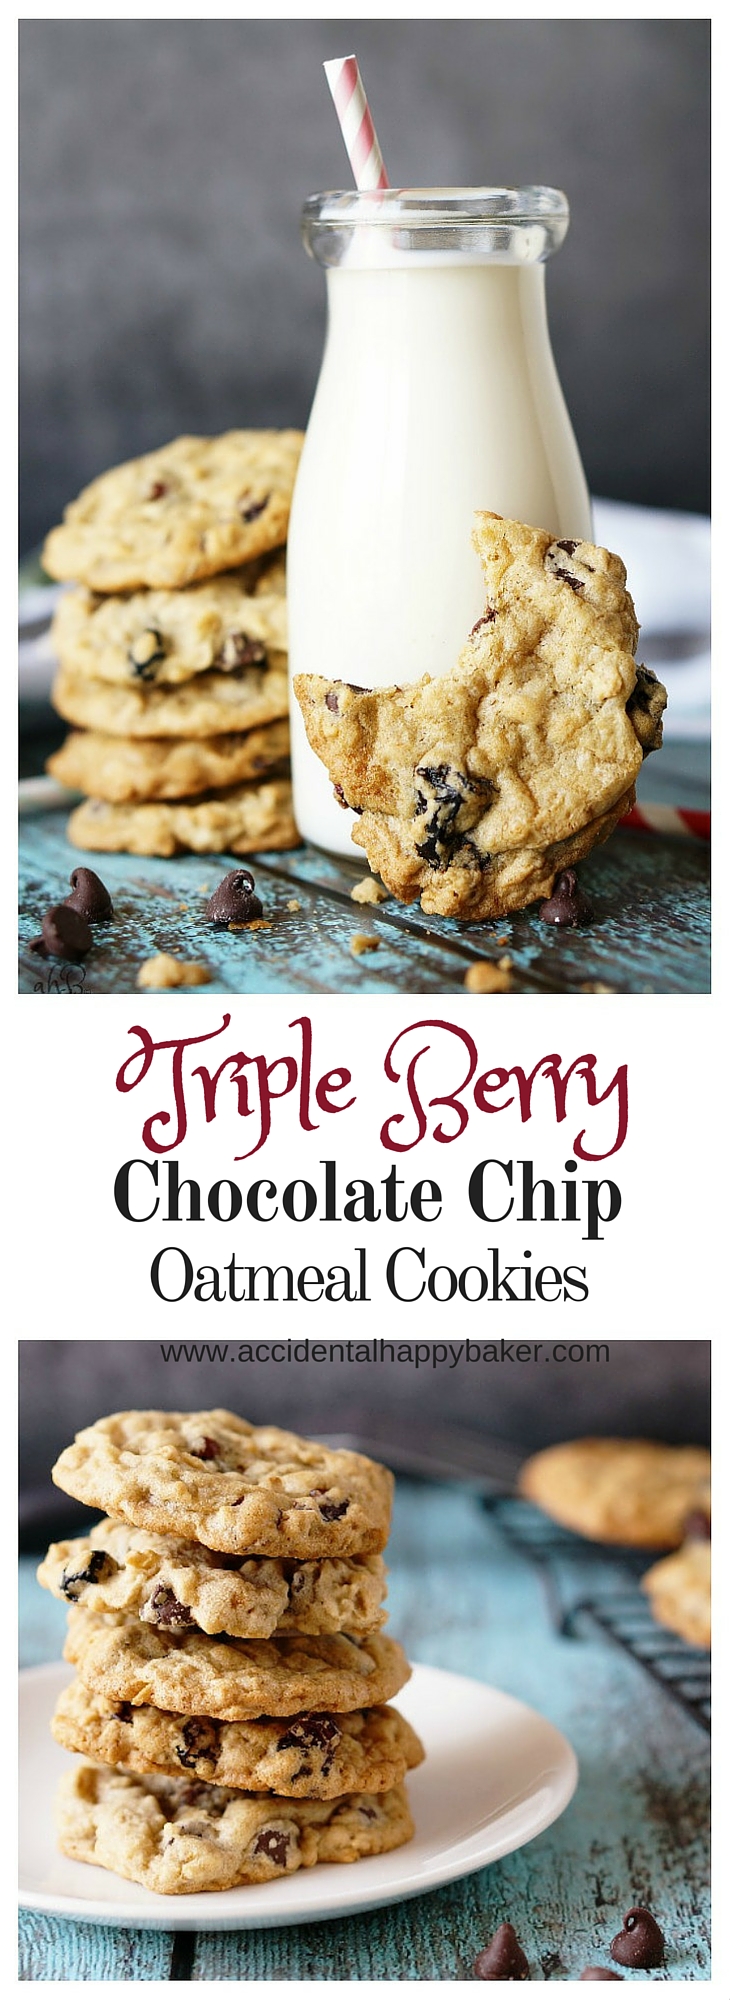 Triple Berry Chocolate Chip Oatmeal Cookies